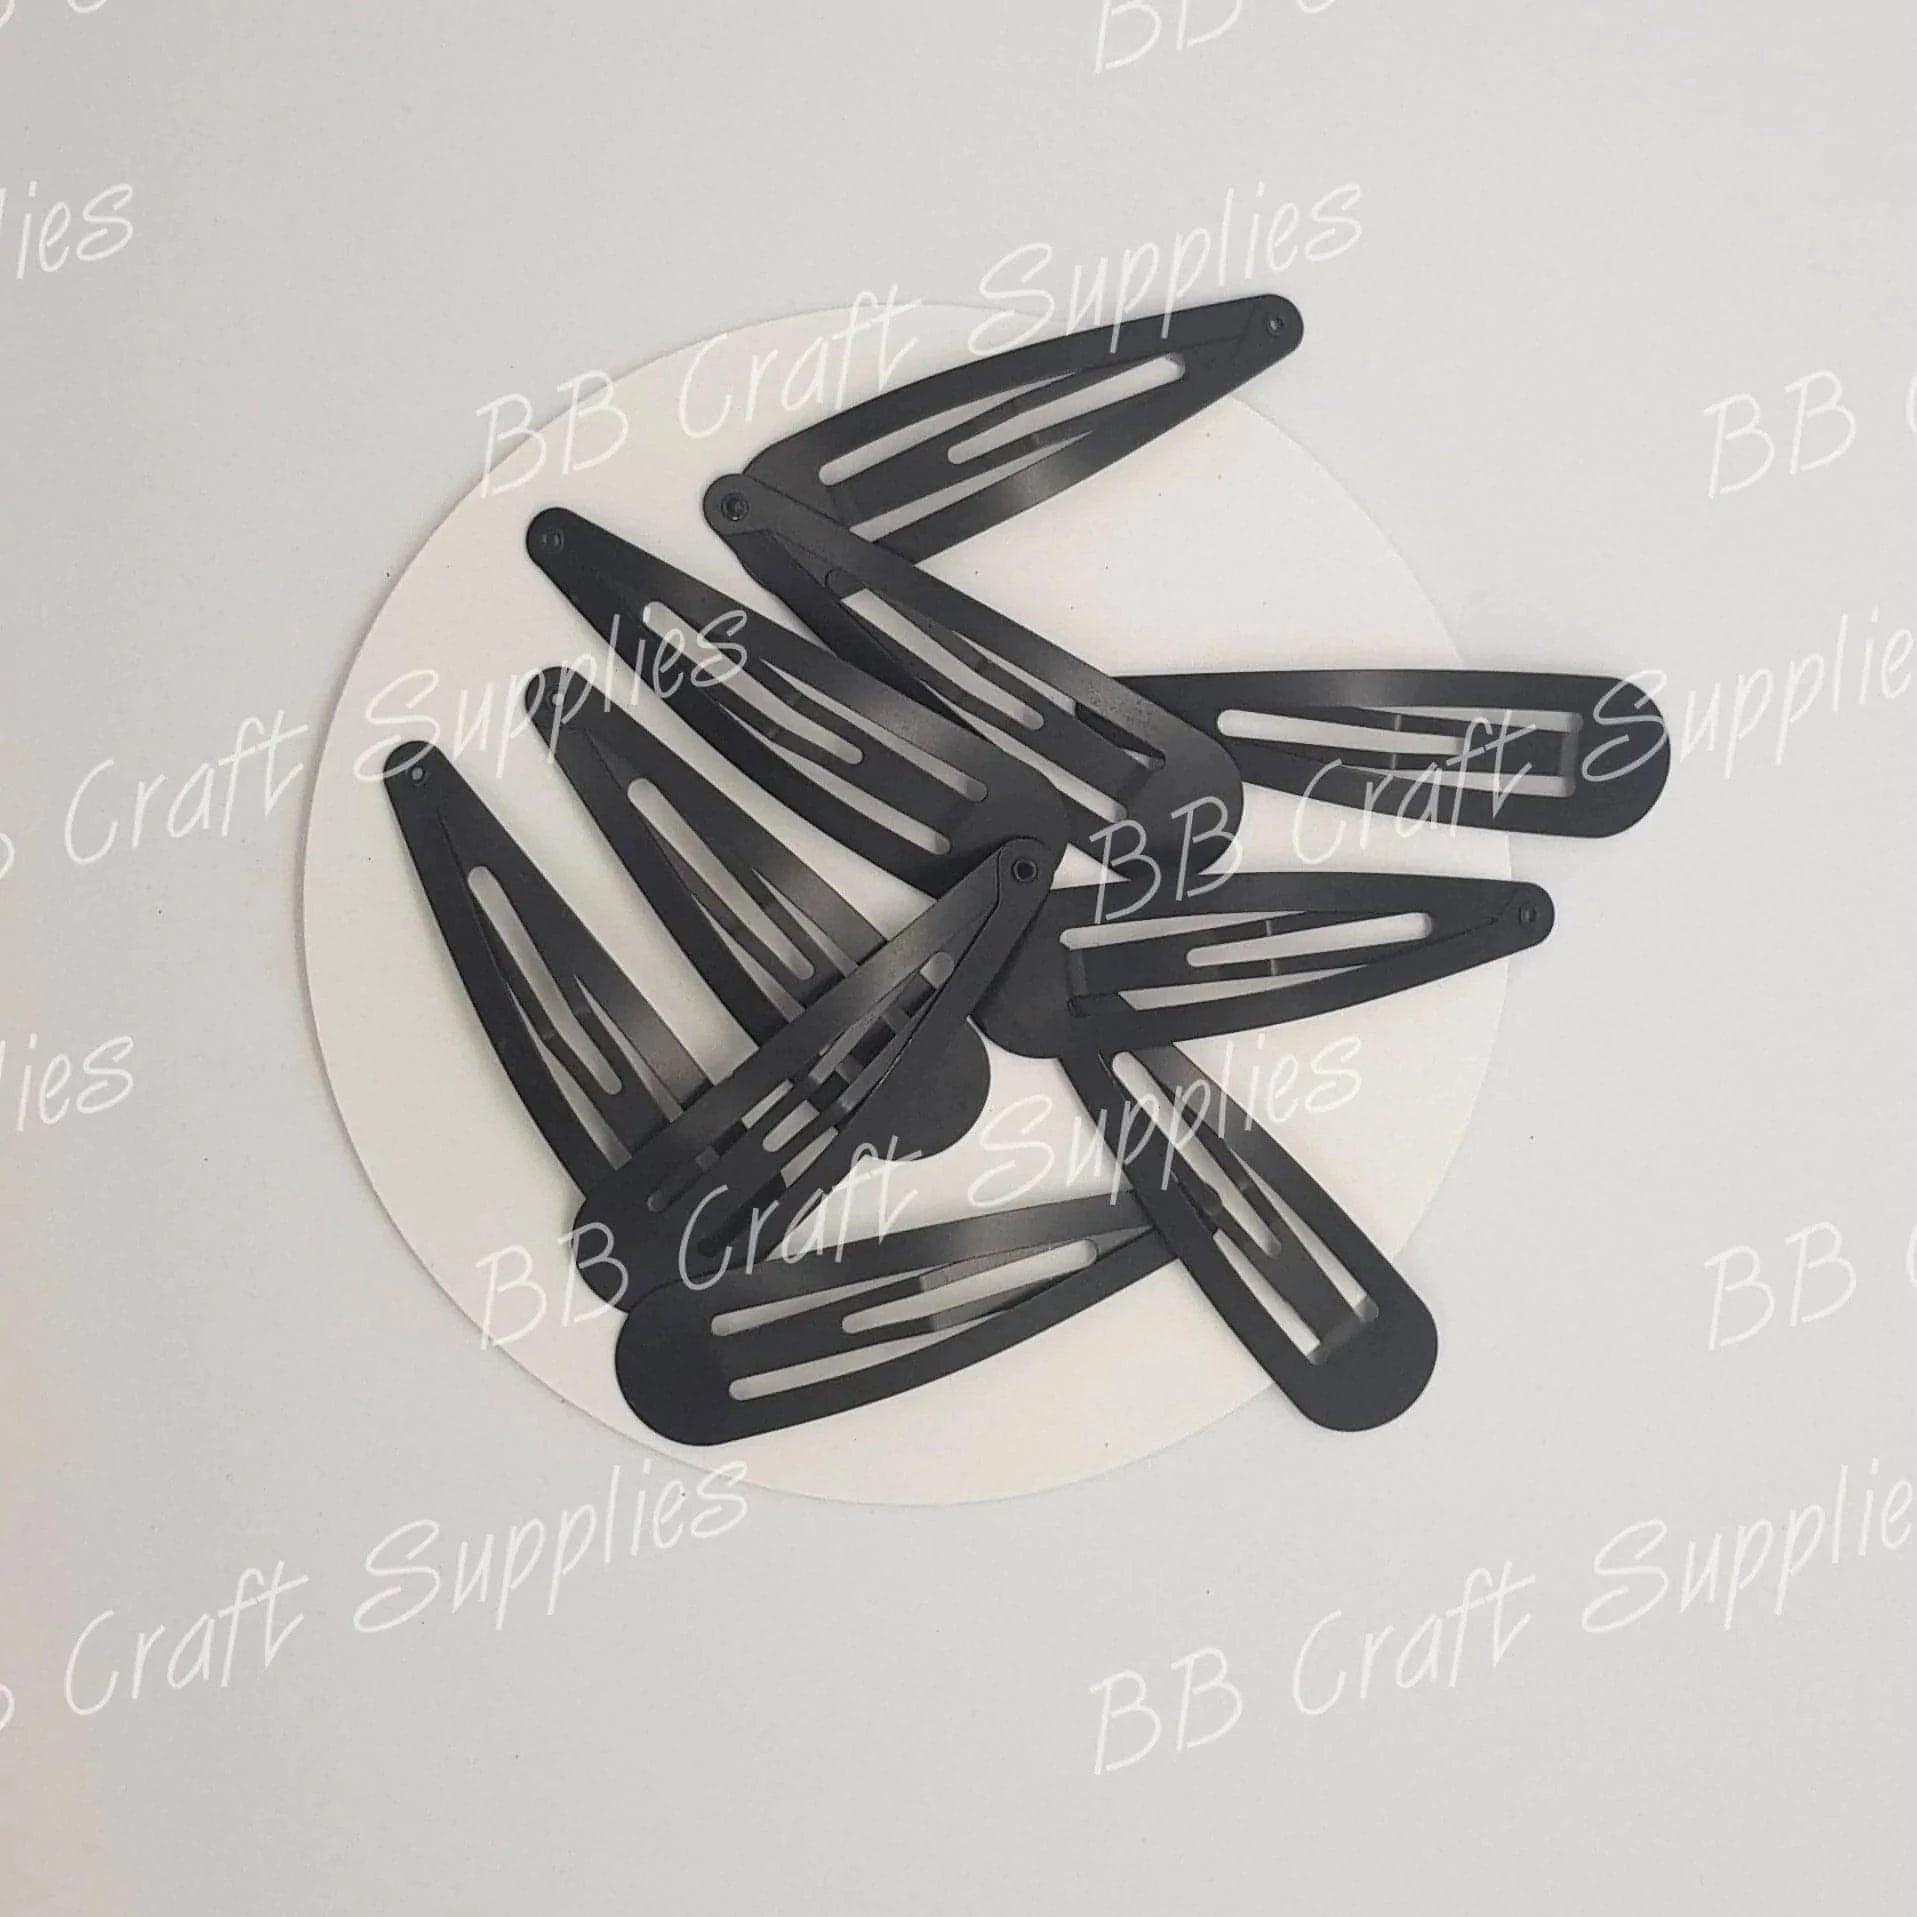 Clearance - Snap Clips 8 cm - 10 Pack - accessories, black, clear, clearance, clips, Embelishment, Hair, Hair clips, snap clip - Bare Butler Faux Leather Supplies 